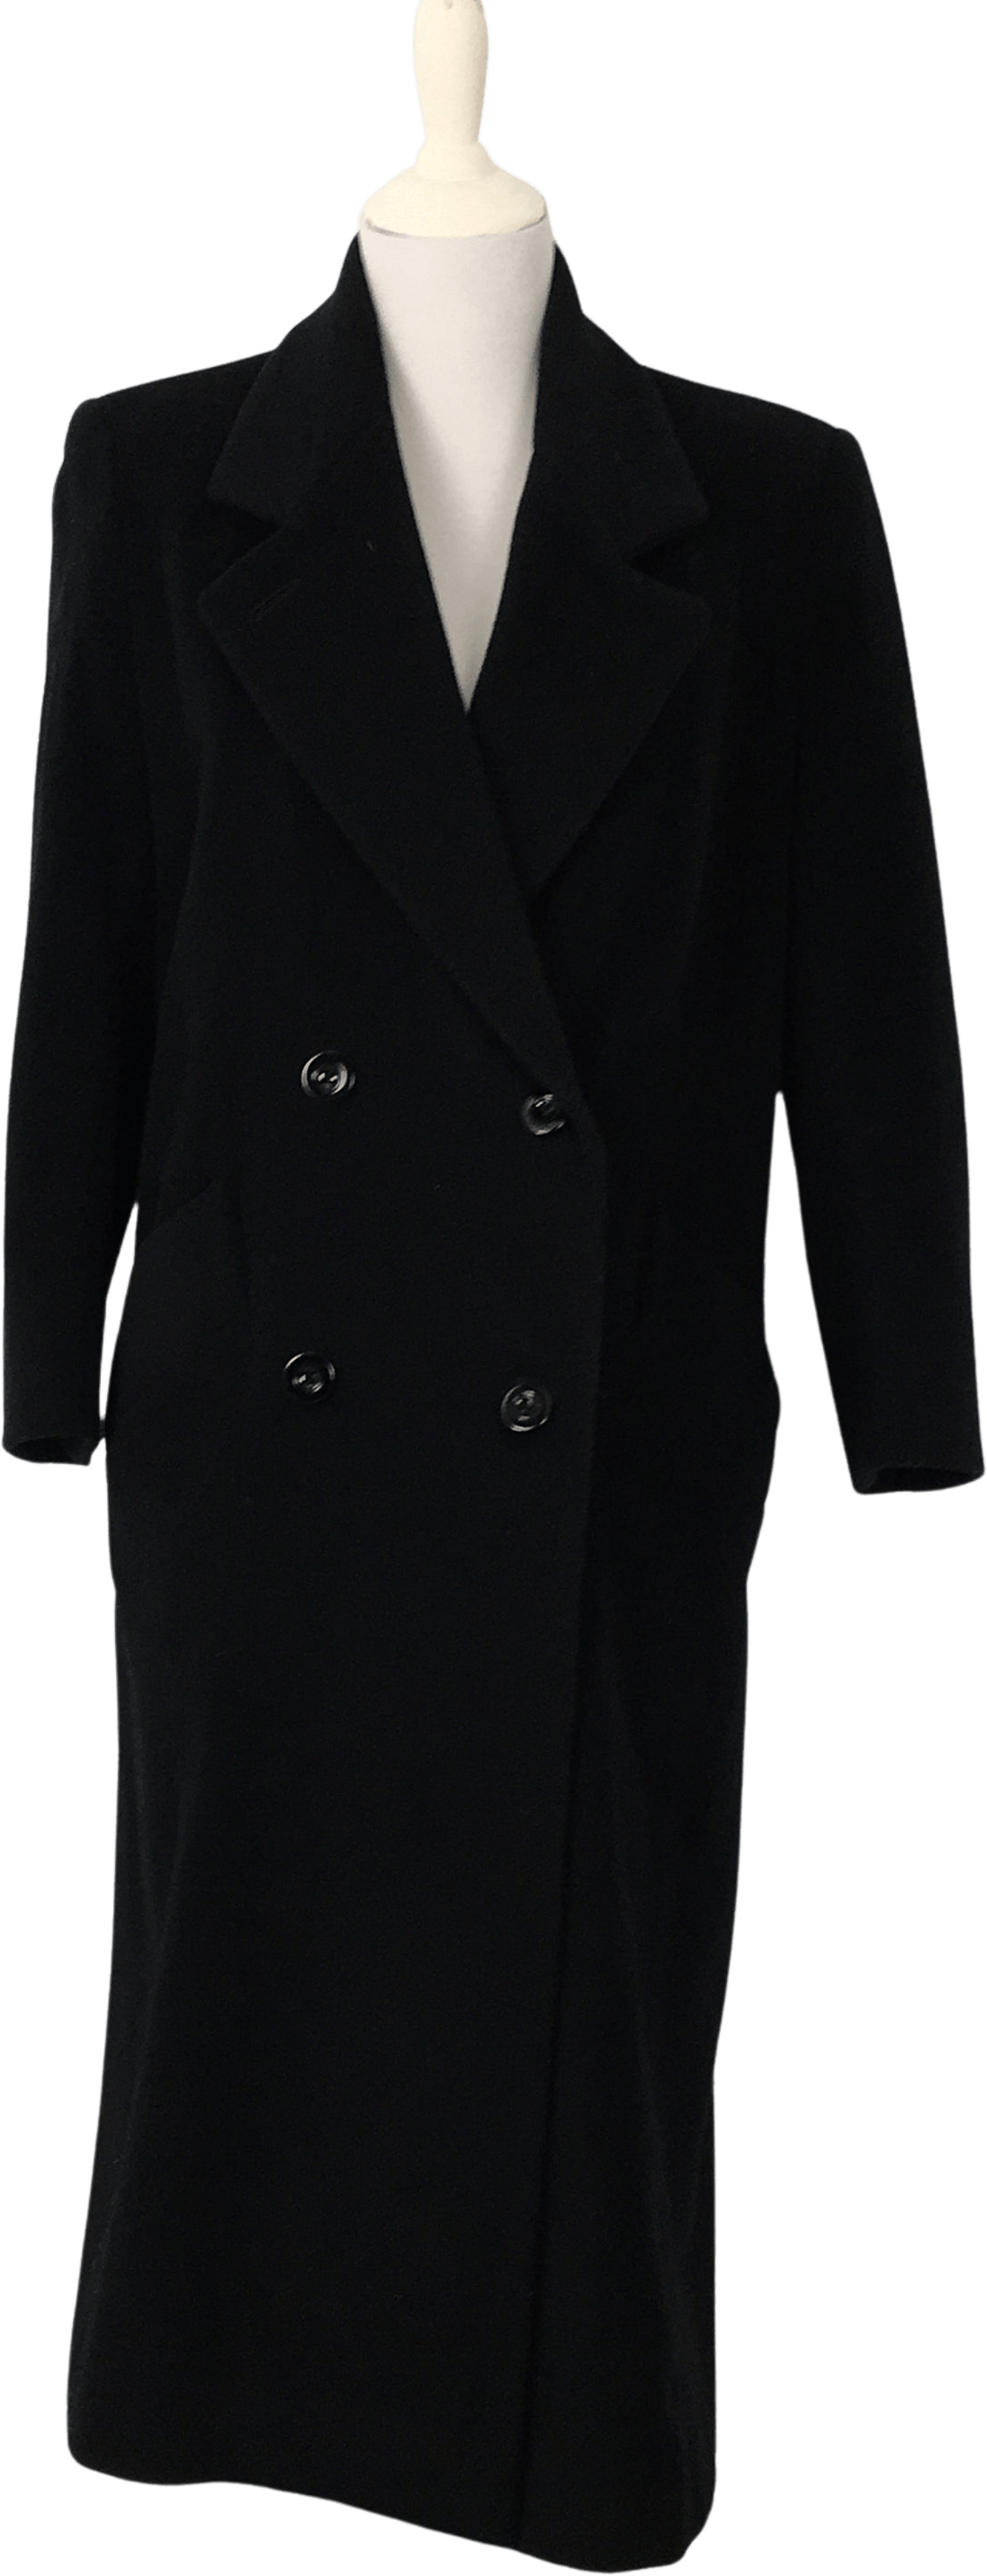 Vintage 70's Long Black Double Breasted Wool Coat by JH Collectibles ...